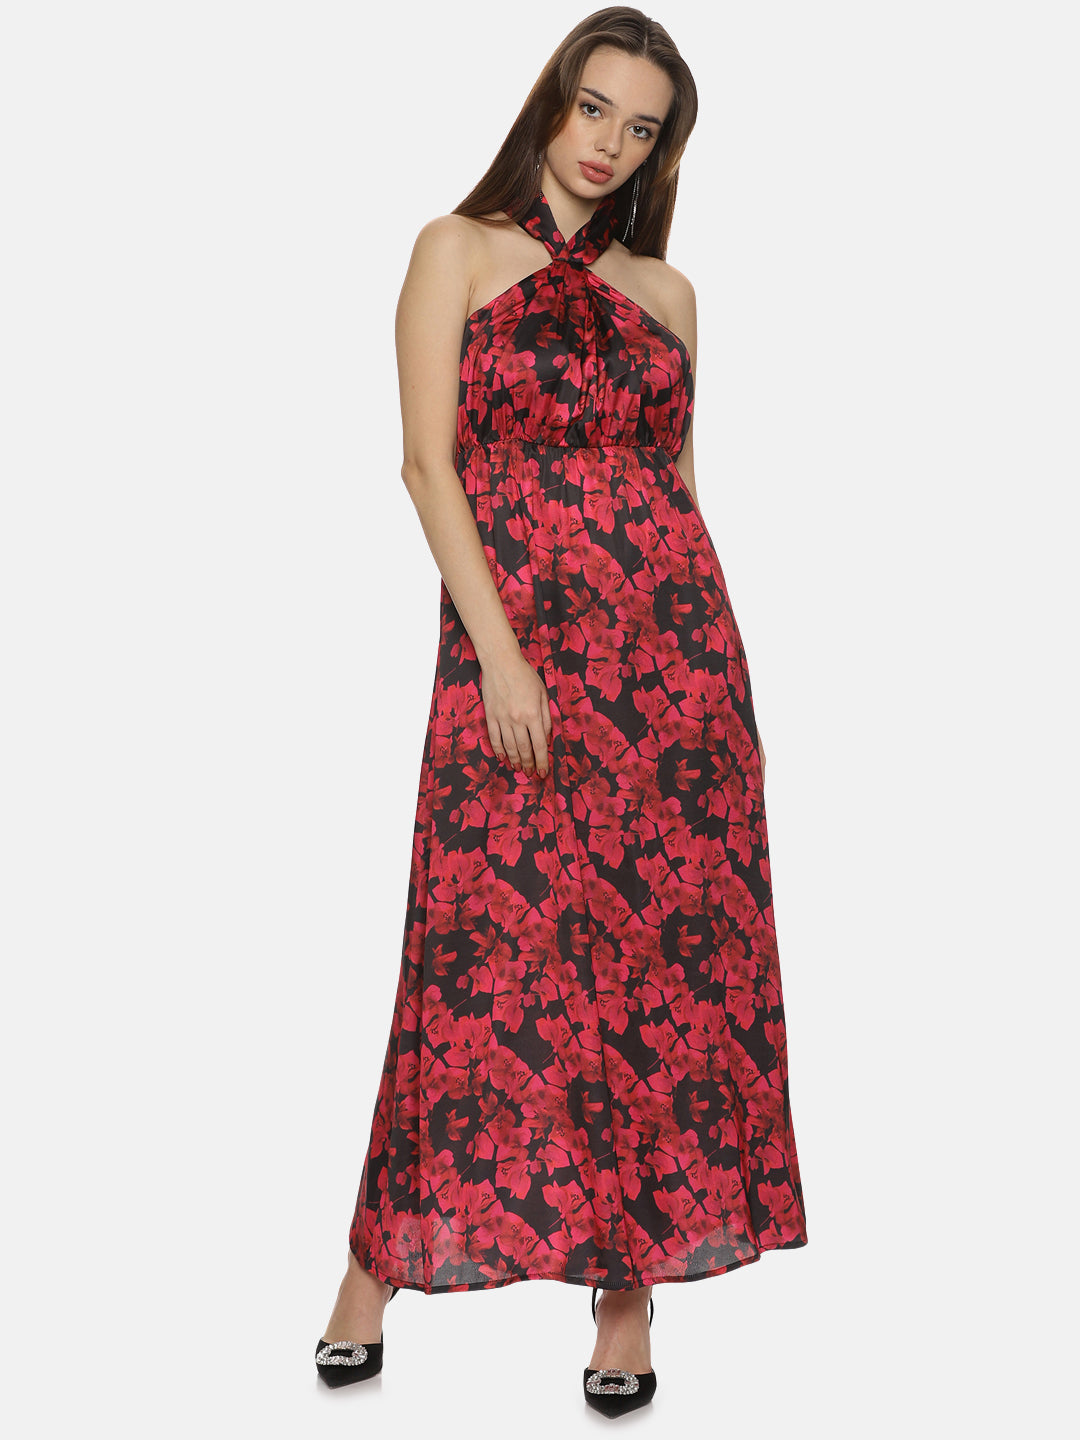 Buy Red Printed Floral Satin Fabric | Halter Maxi Dress Online In India